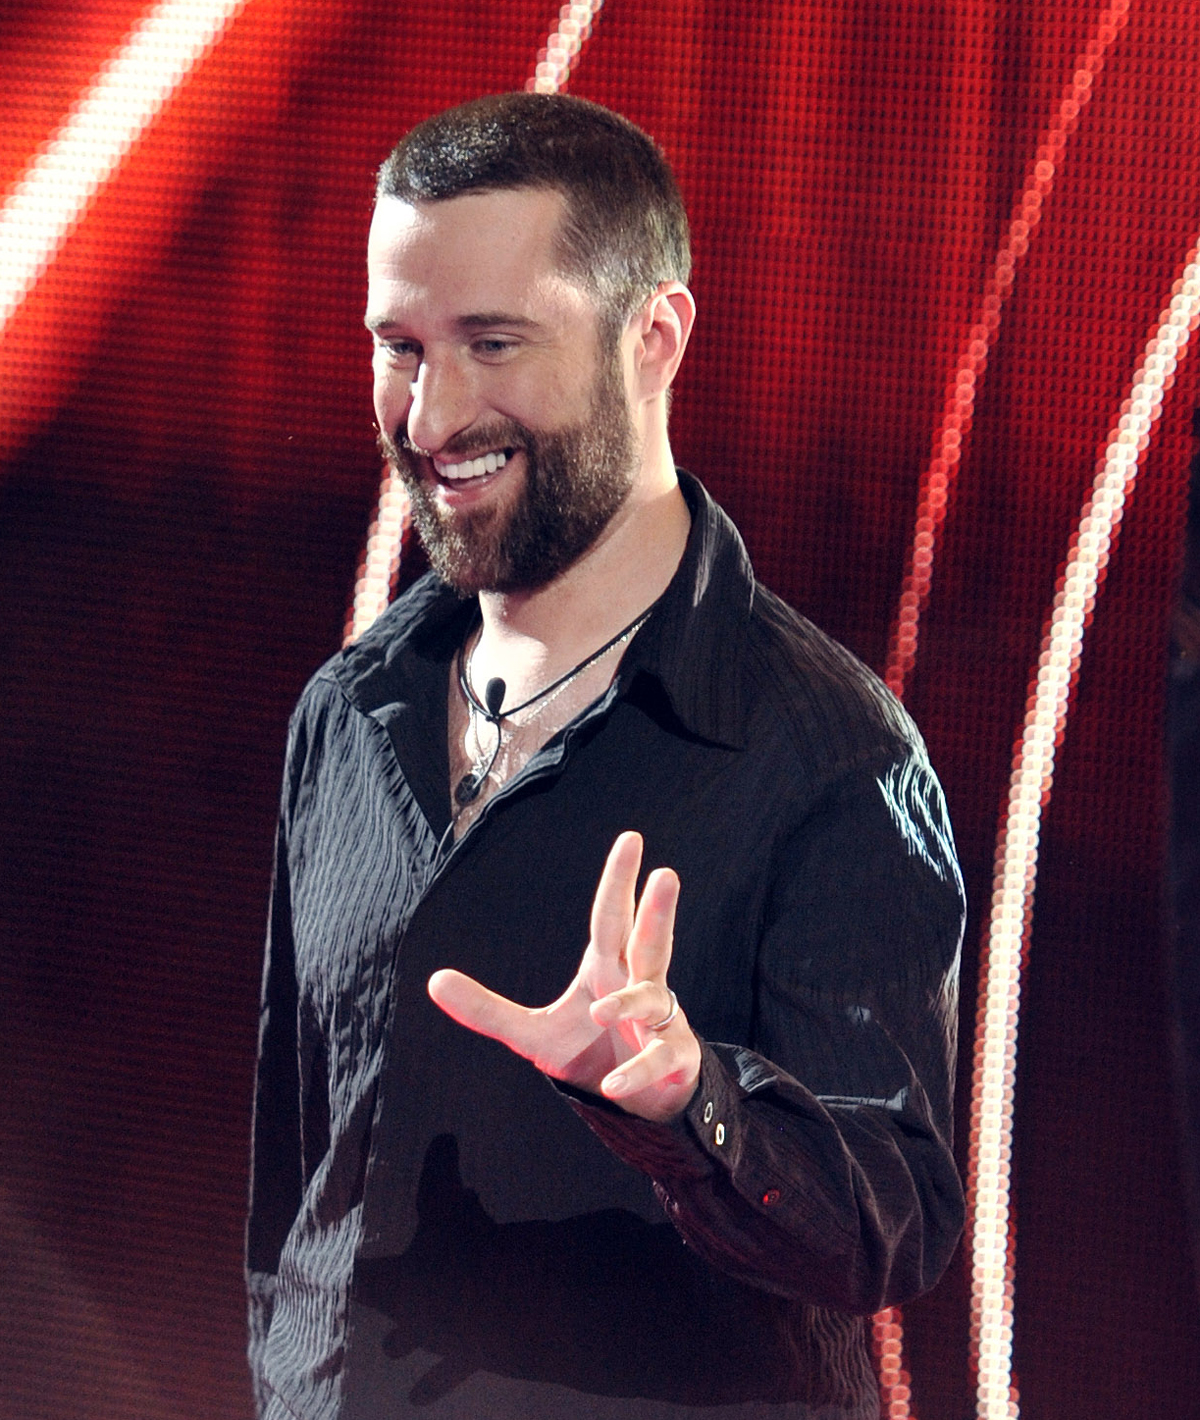 Dustin Diamond Died Of Lung Cancer